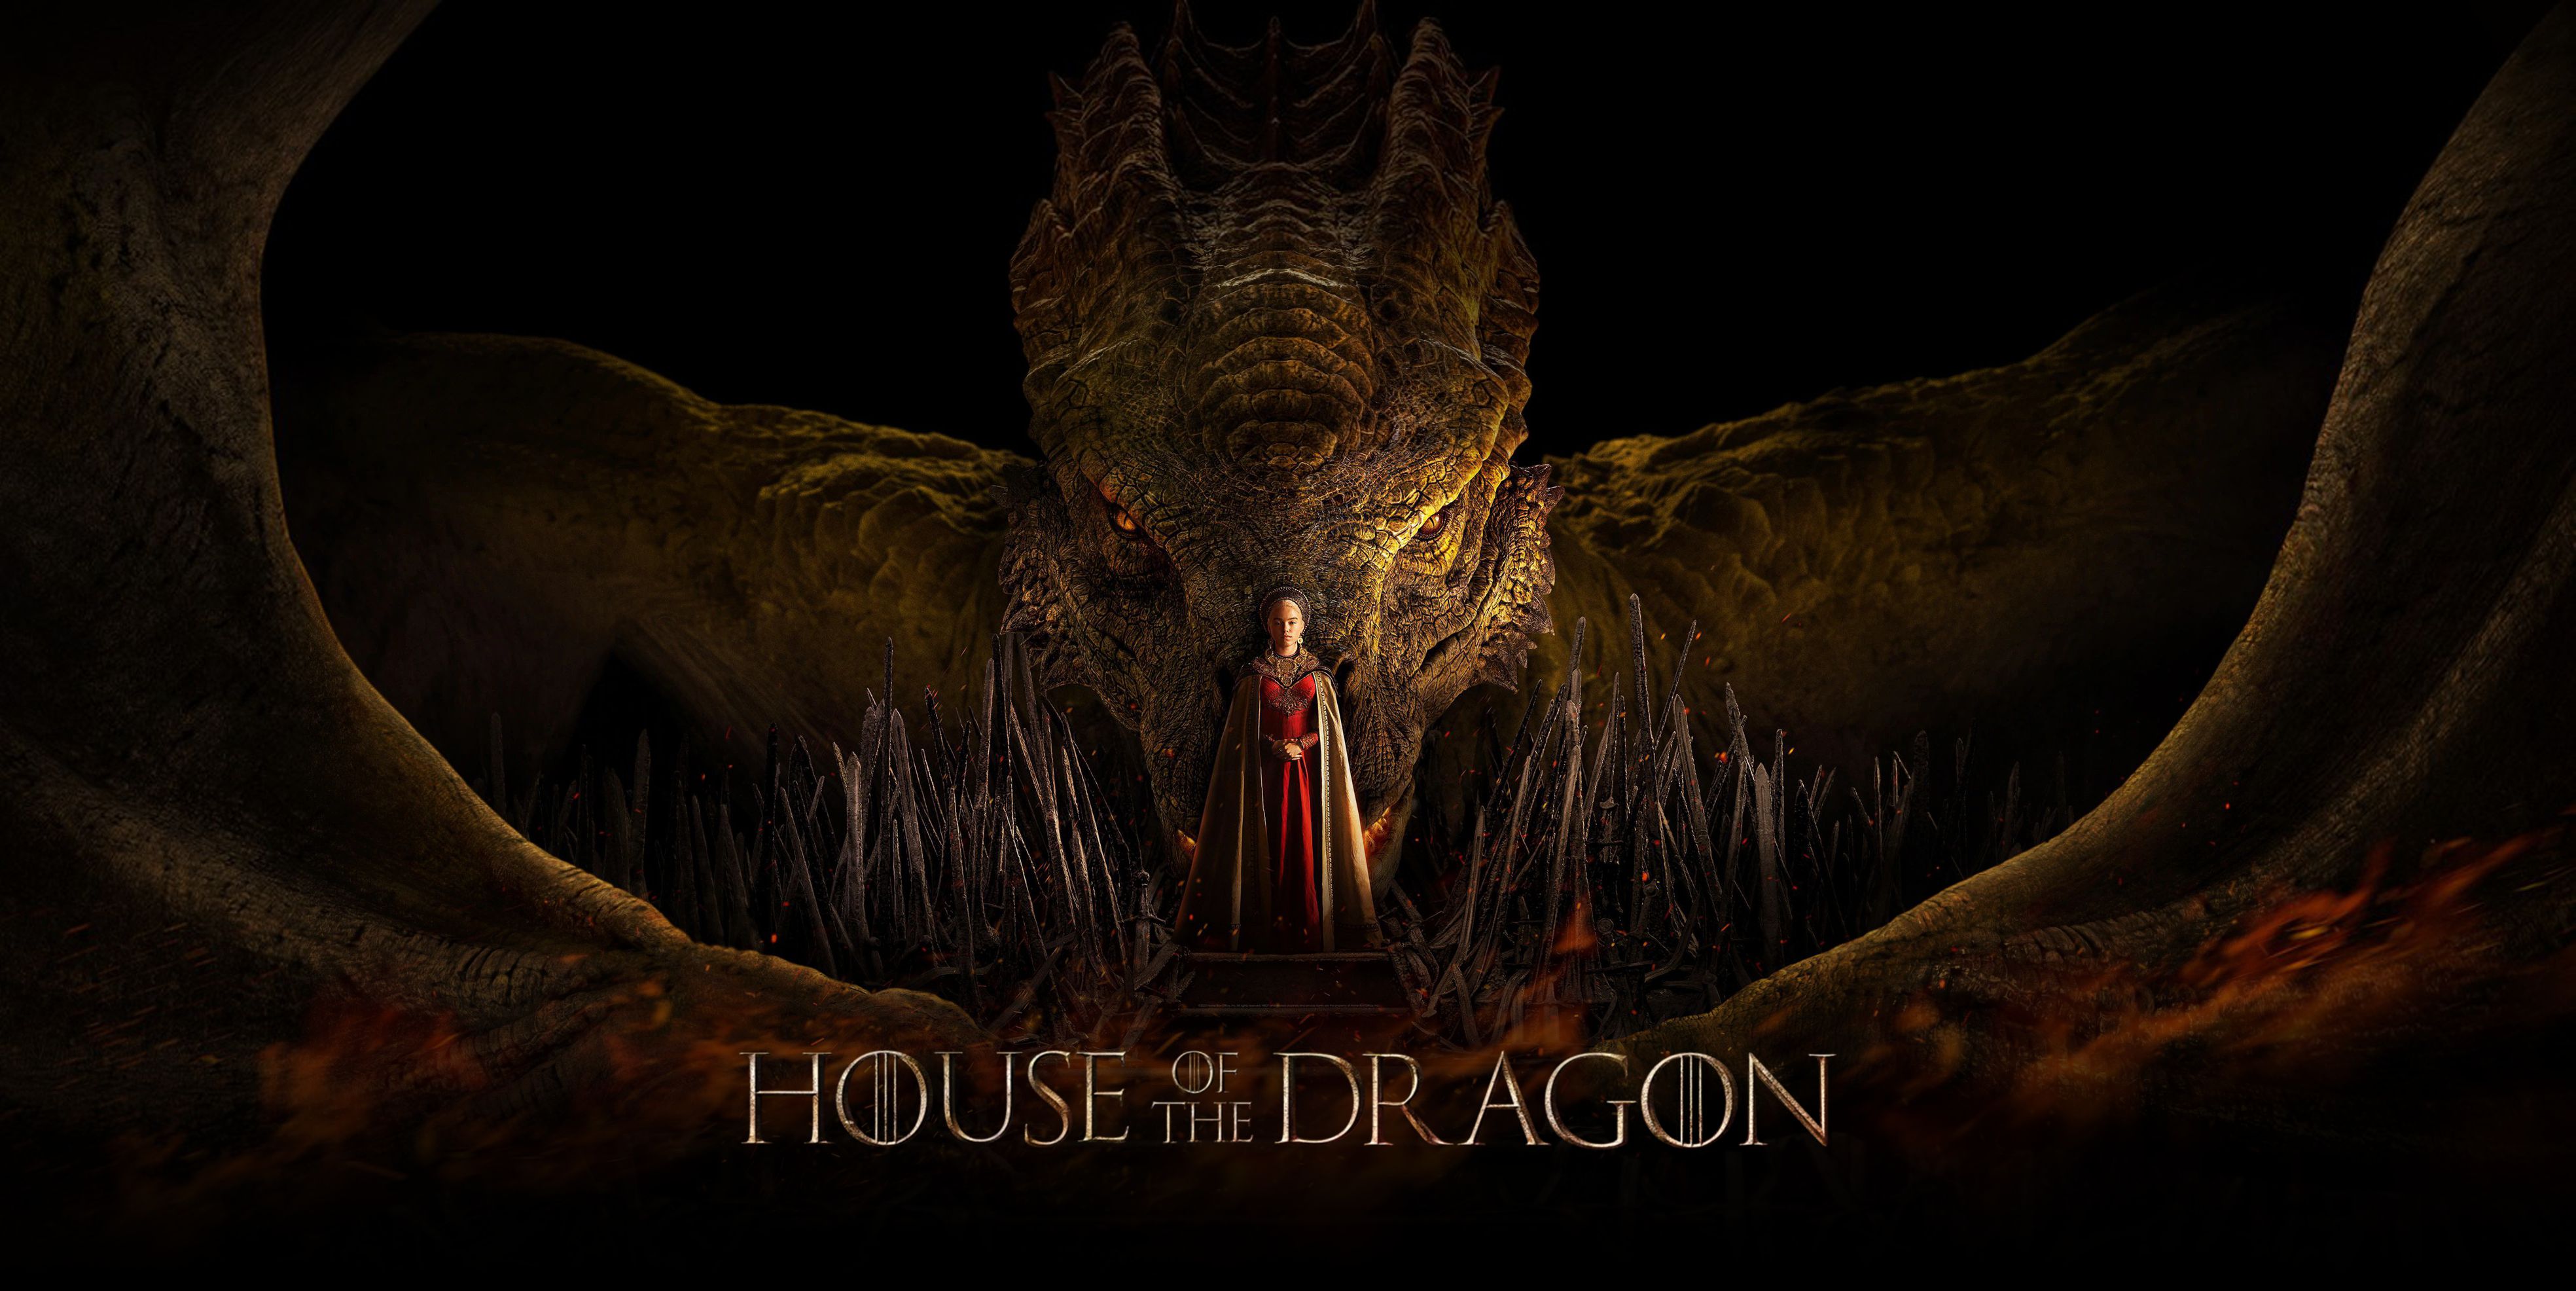 People 3936x1972 House of the Dragon dragon TV series fantasy girl promotional women Game of Thrones digital art